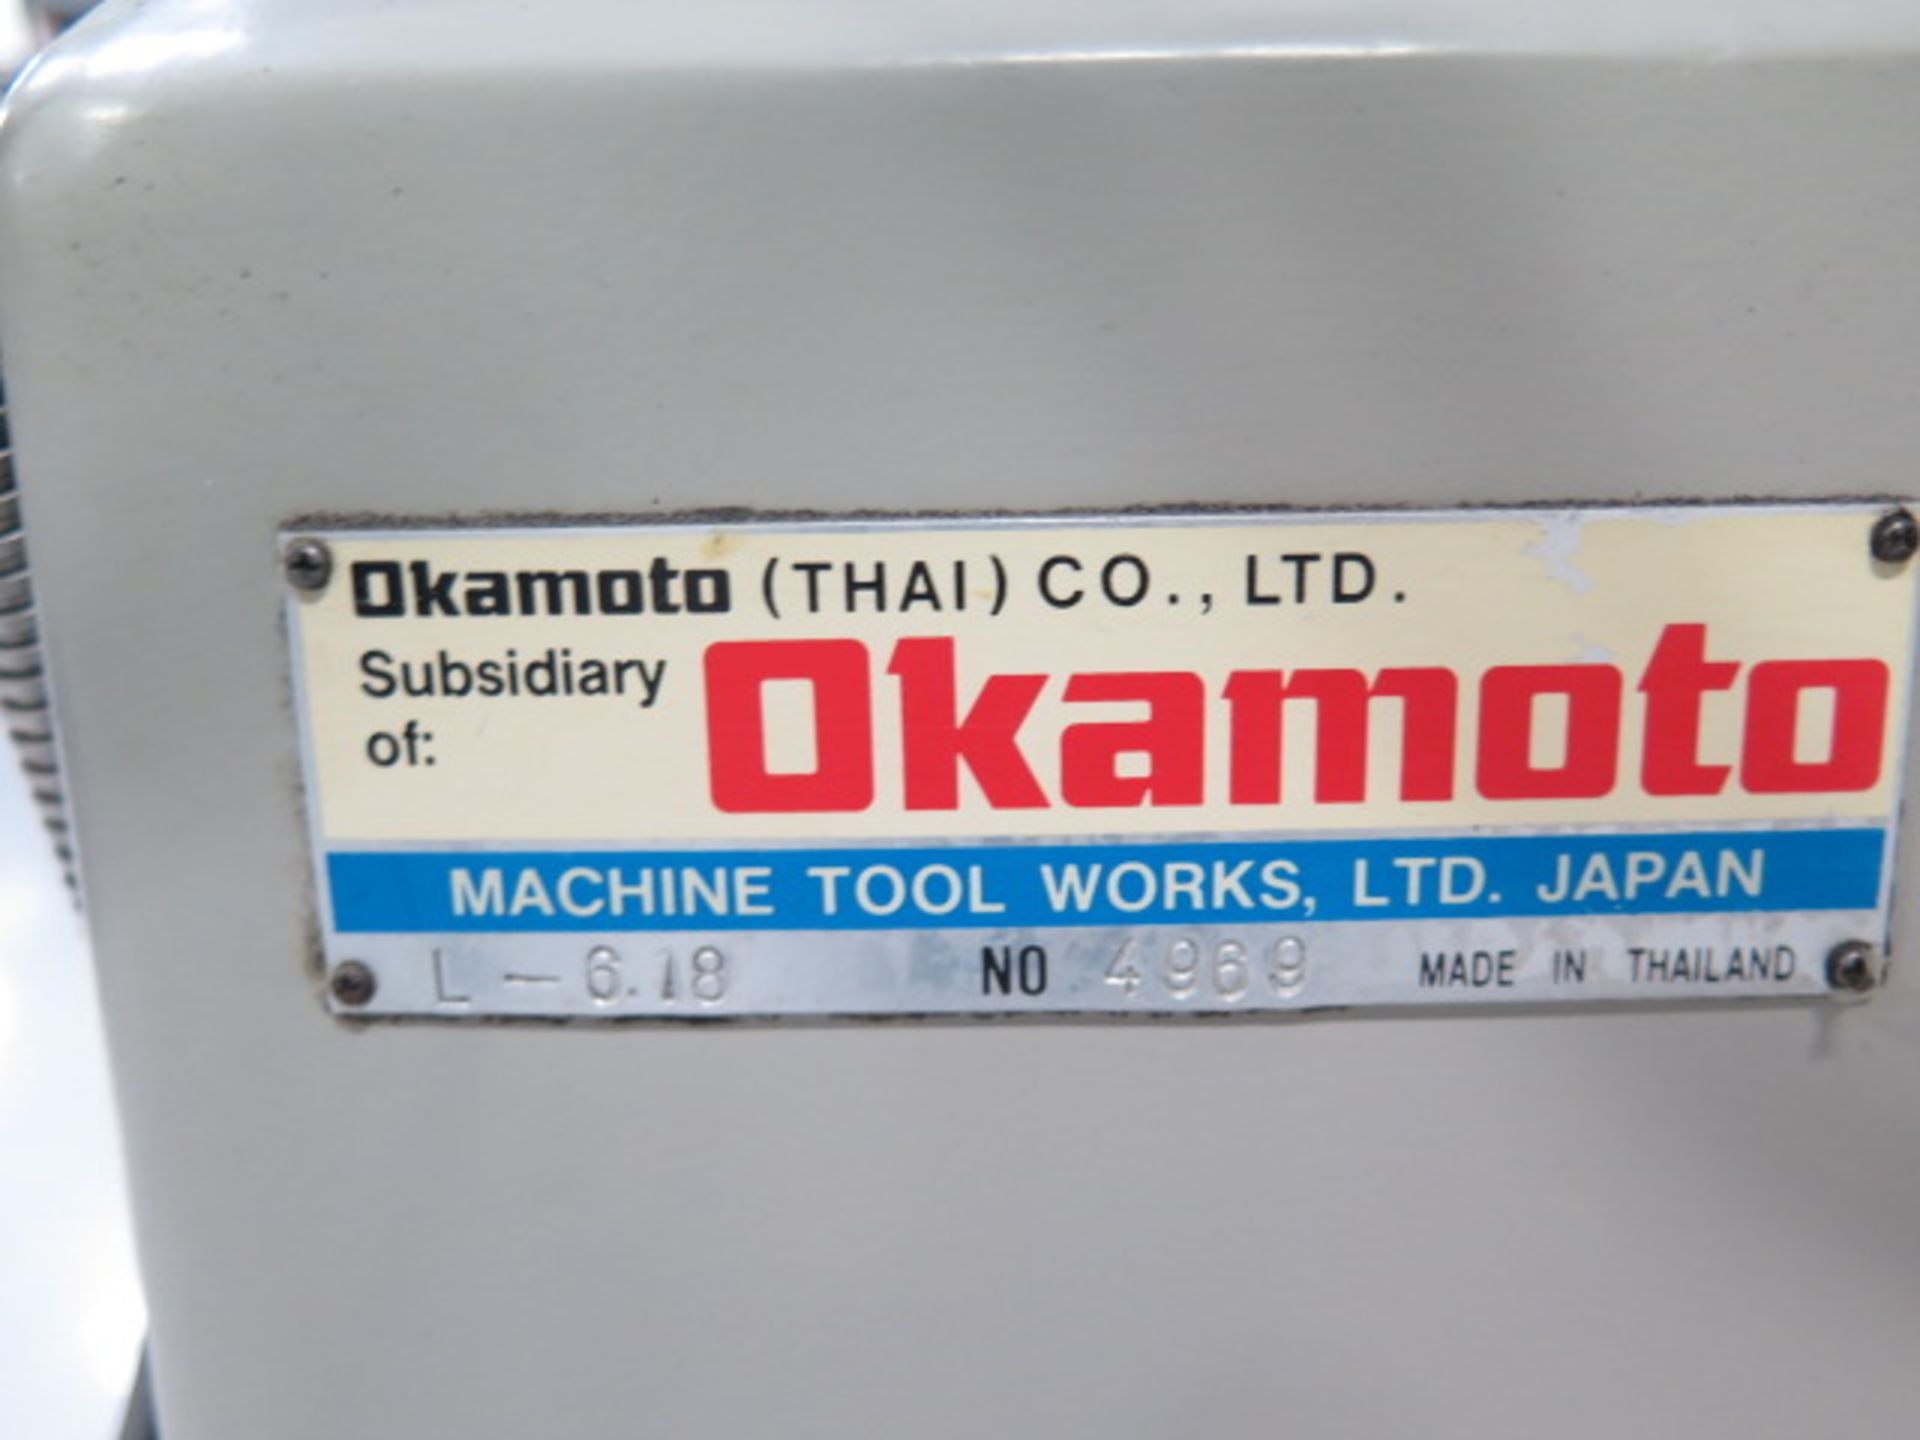 Okamoto “6-18 LINEAR” 6” x 18” Surface Grinder s/n 4469 w/ Mitutoyo UDR-220 Program DRO, SOLD AS IS - Image 15 of 15